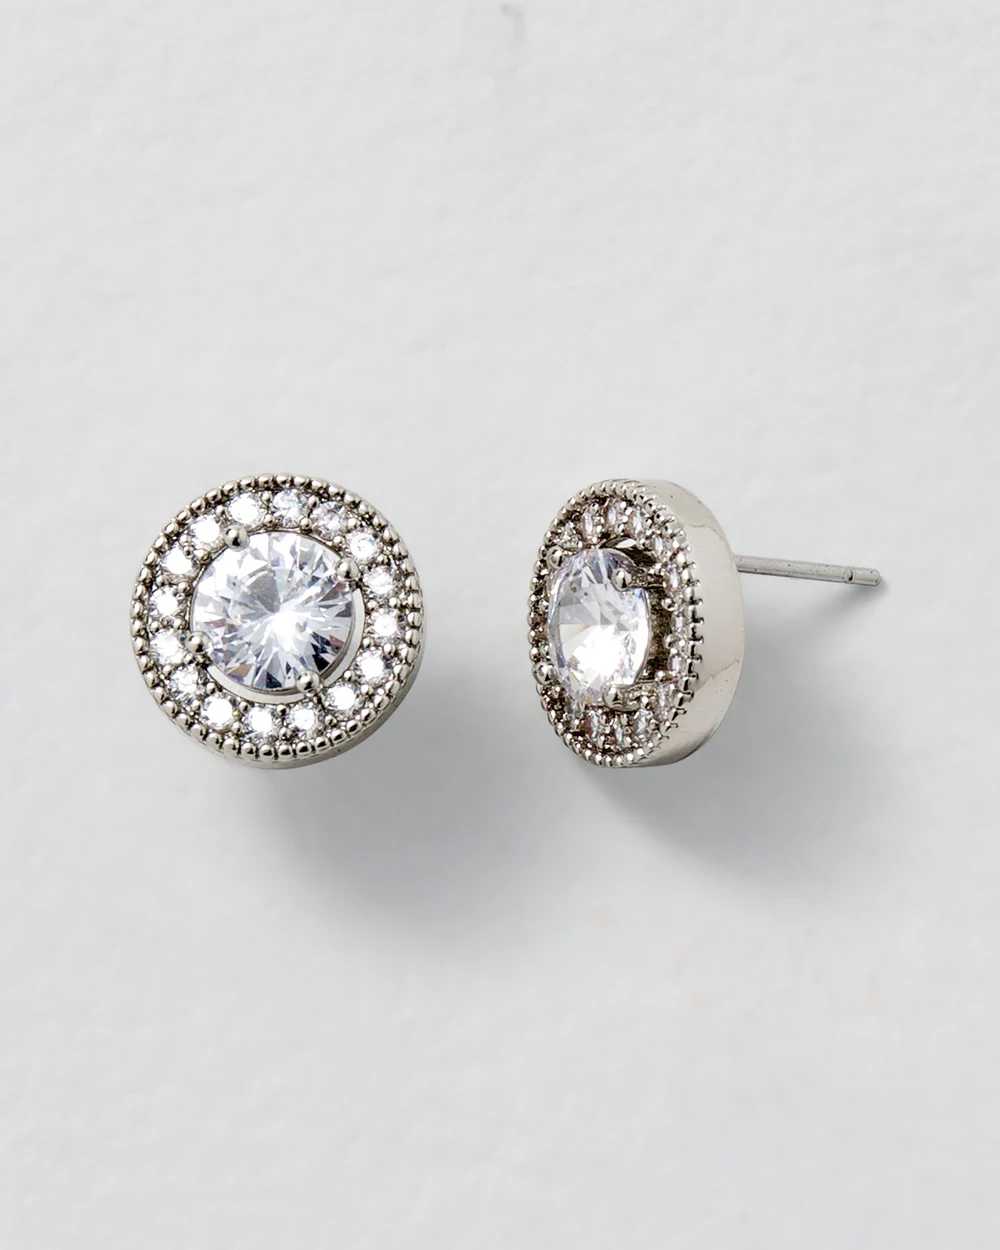 Silvertone Crystal Stud Earrings click to view larger image.